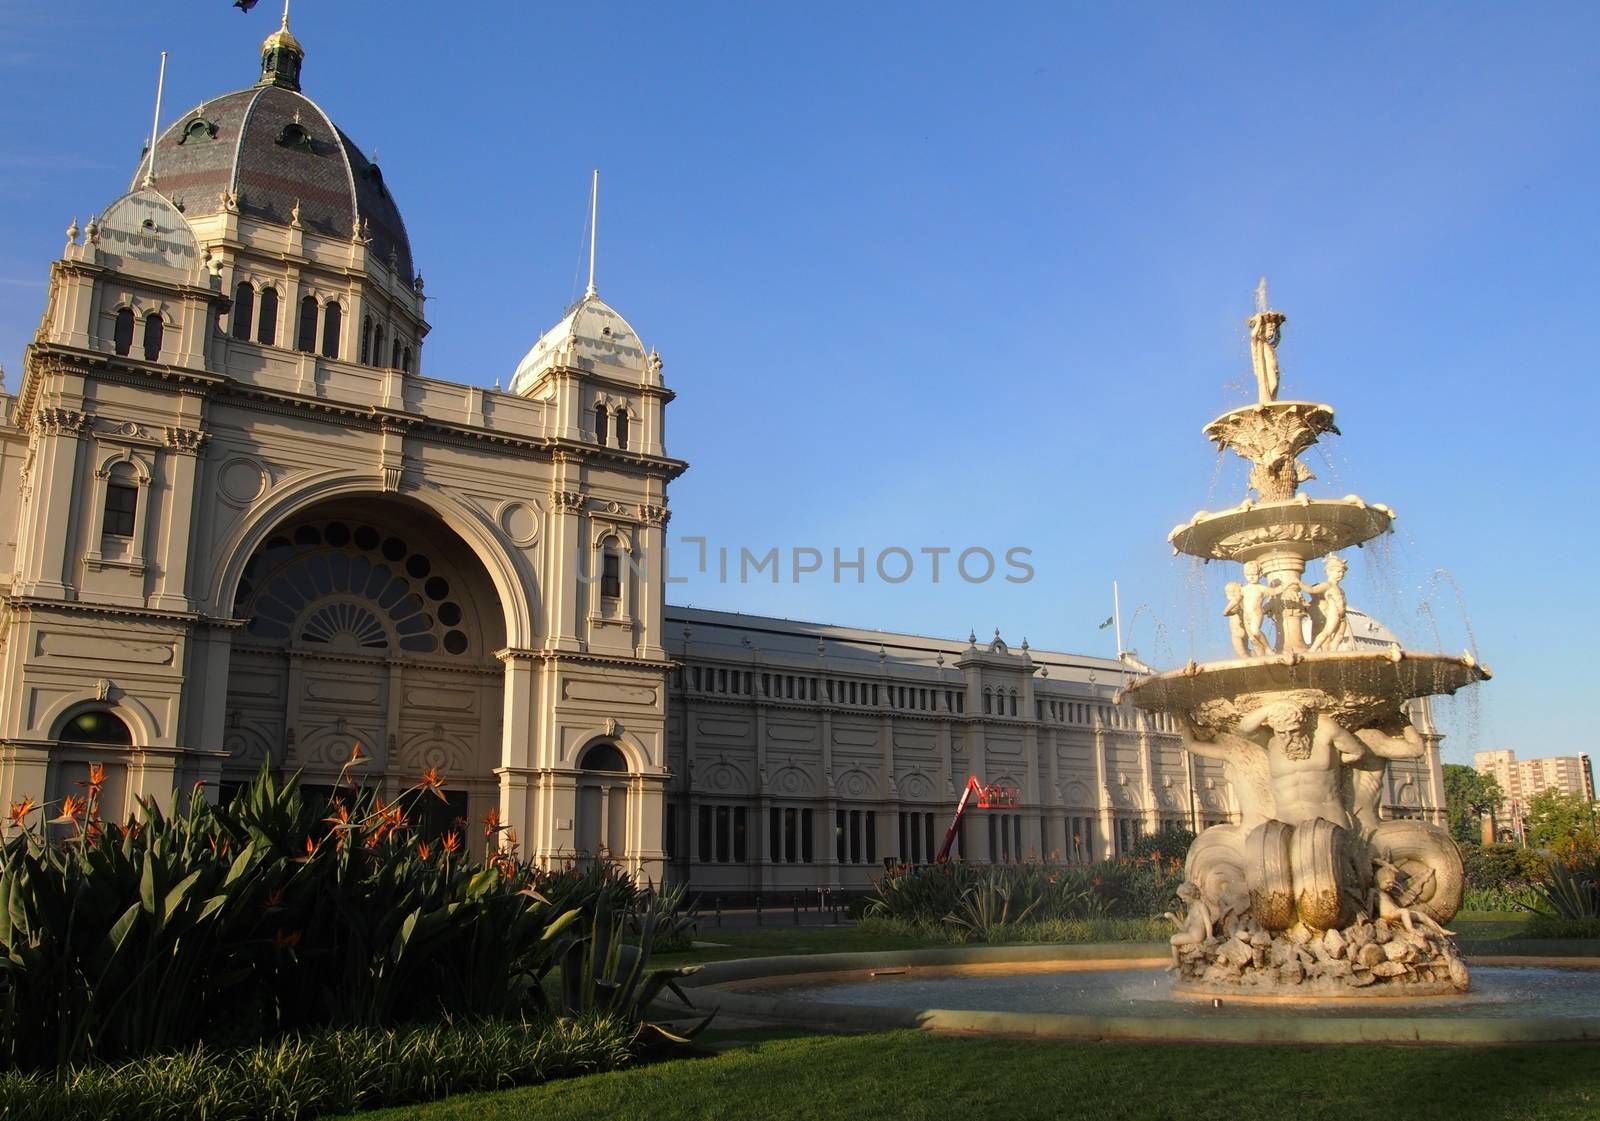 Fountain in front of Royal Exhibition Building in Melbourne